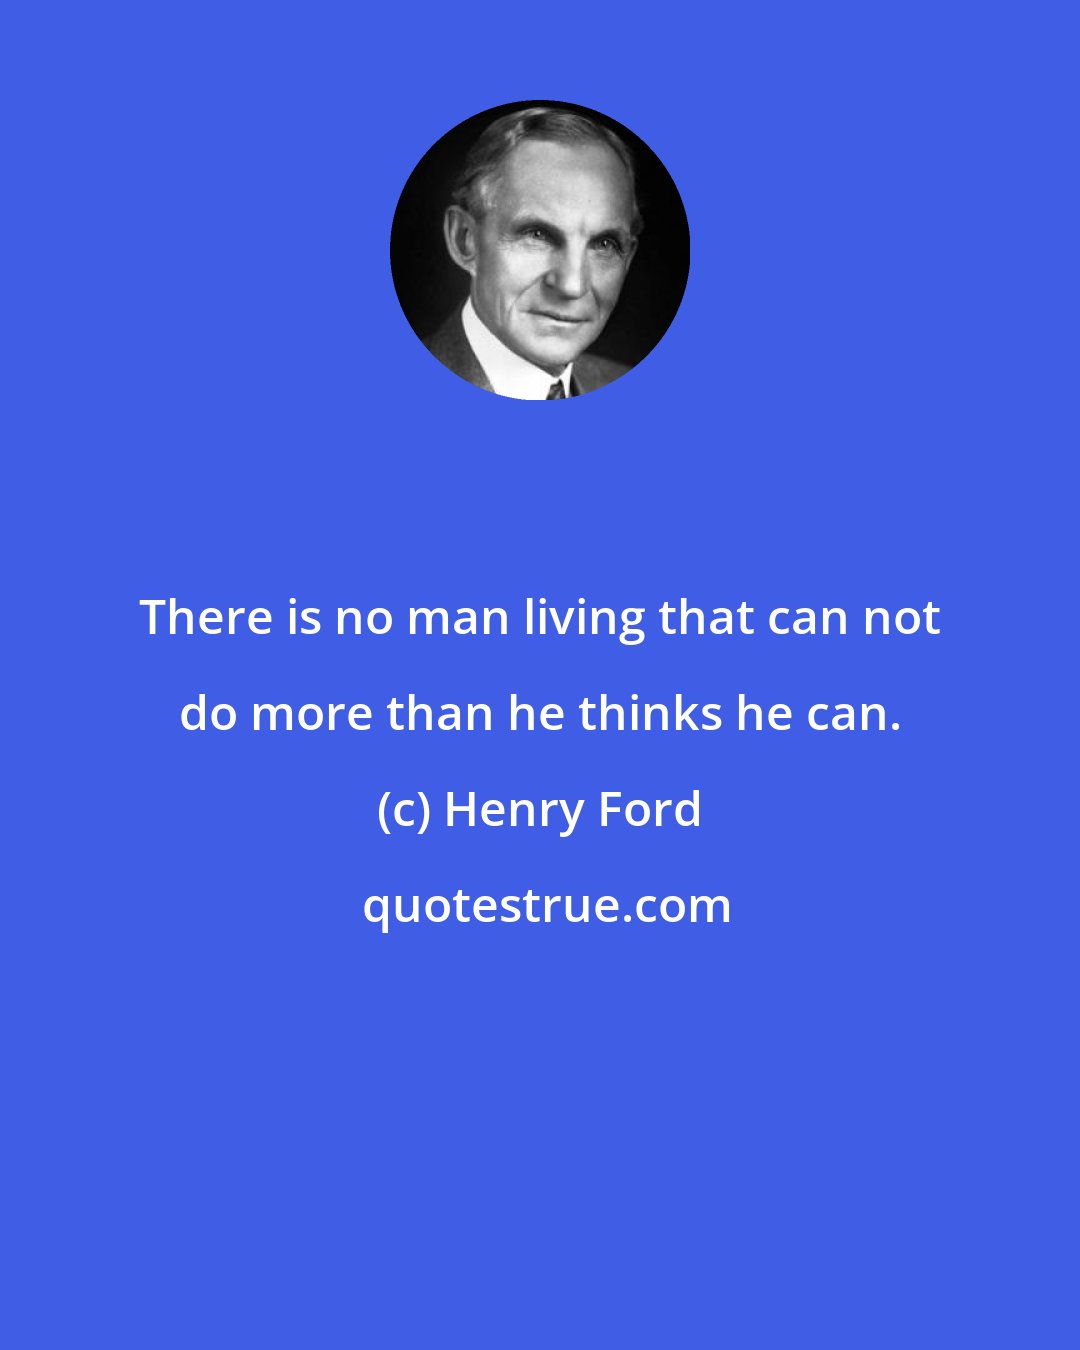 Henry Ford: There is no man living that can not do more than he thinks he can.